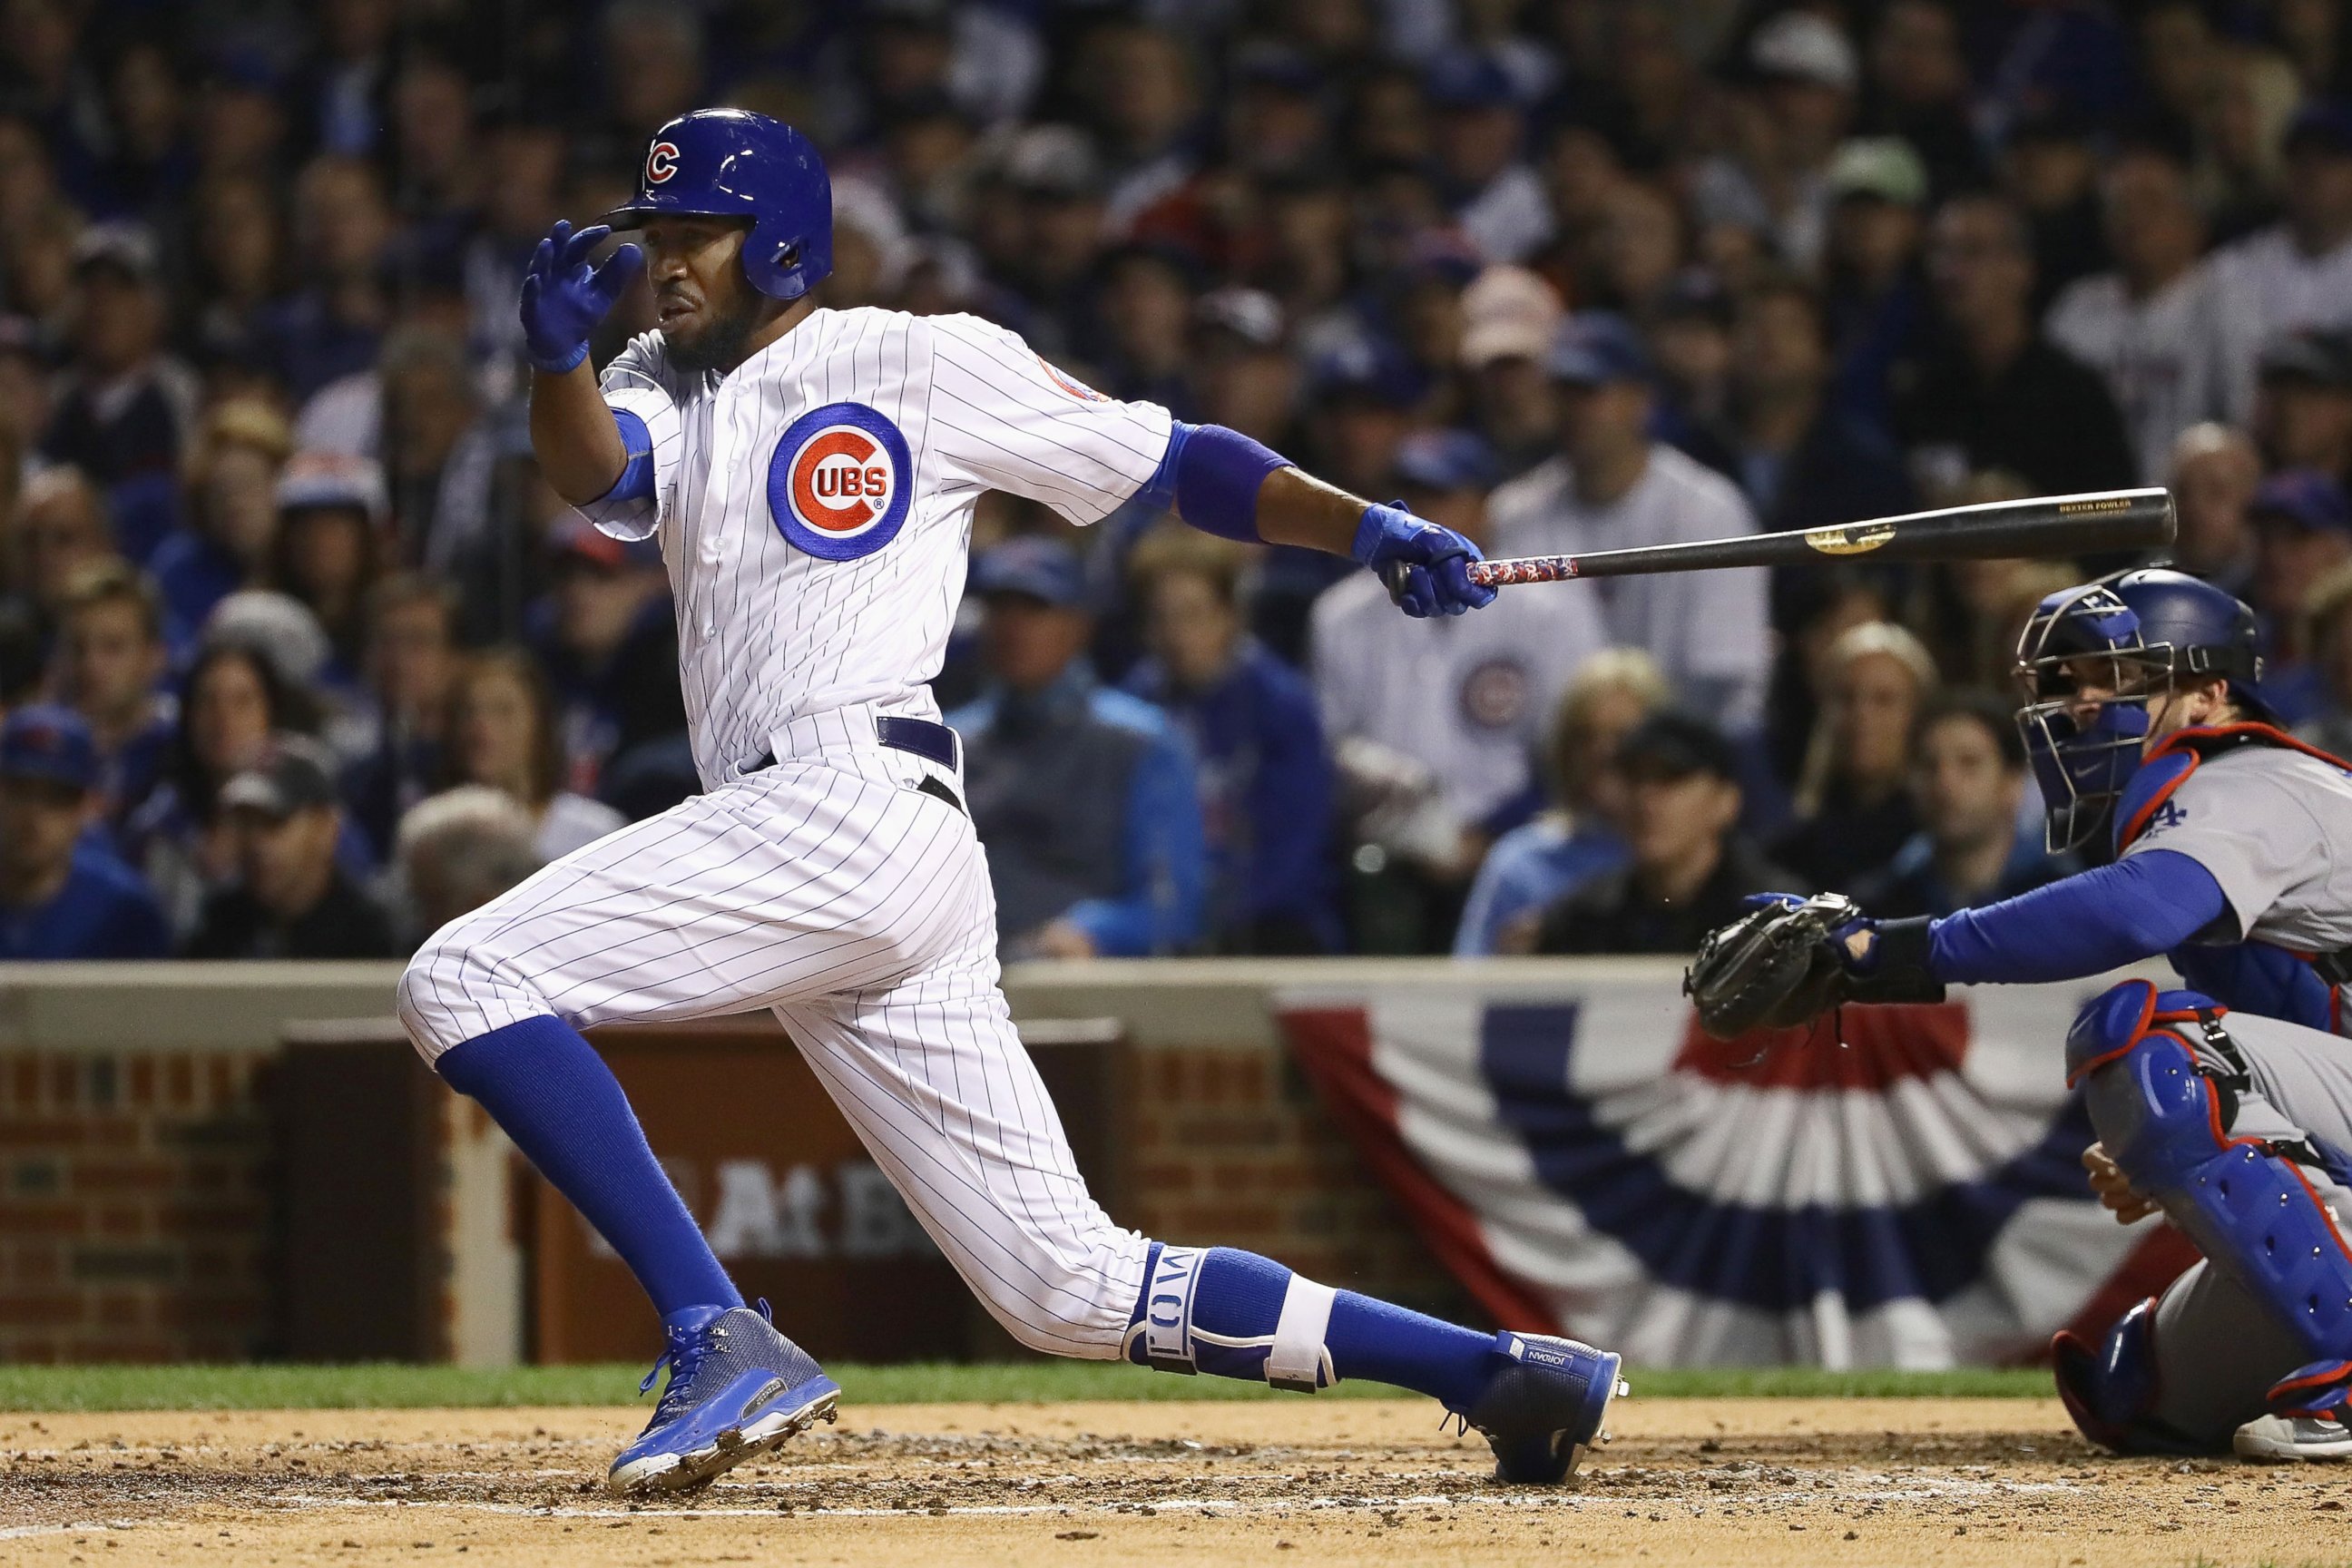 PHOTO: Dexter Fowler of the Chicago Cubs hits an RBI single in the second inning against the Los Angeles Dodgers during game six of the National League Championship Series at Wrigley Field on October 22, 2016 in Chicago, Ill. 